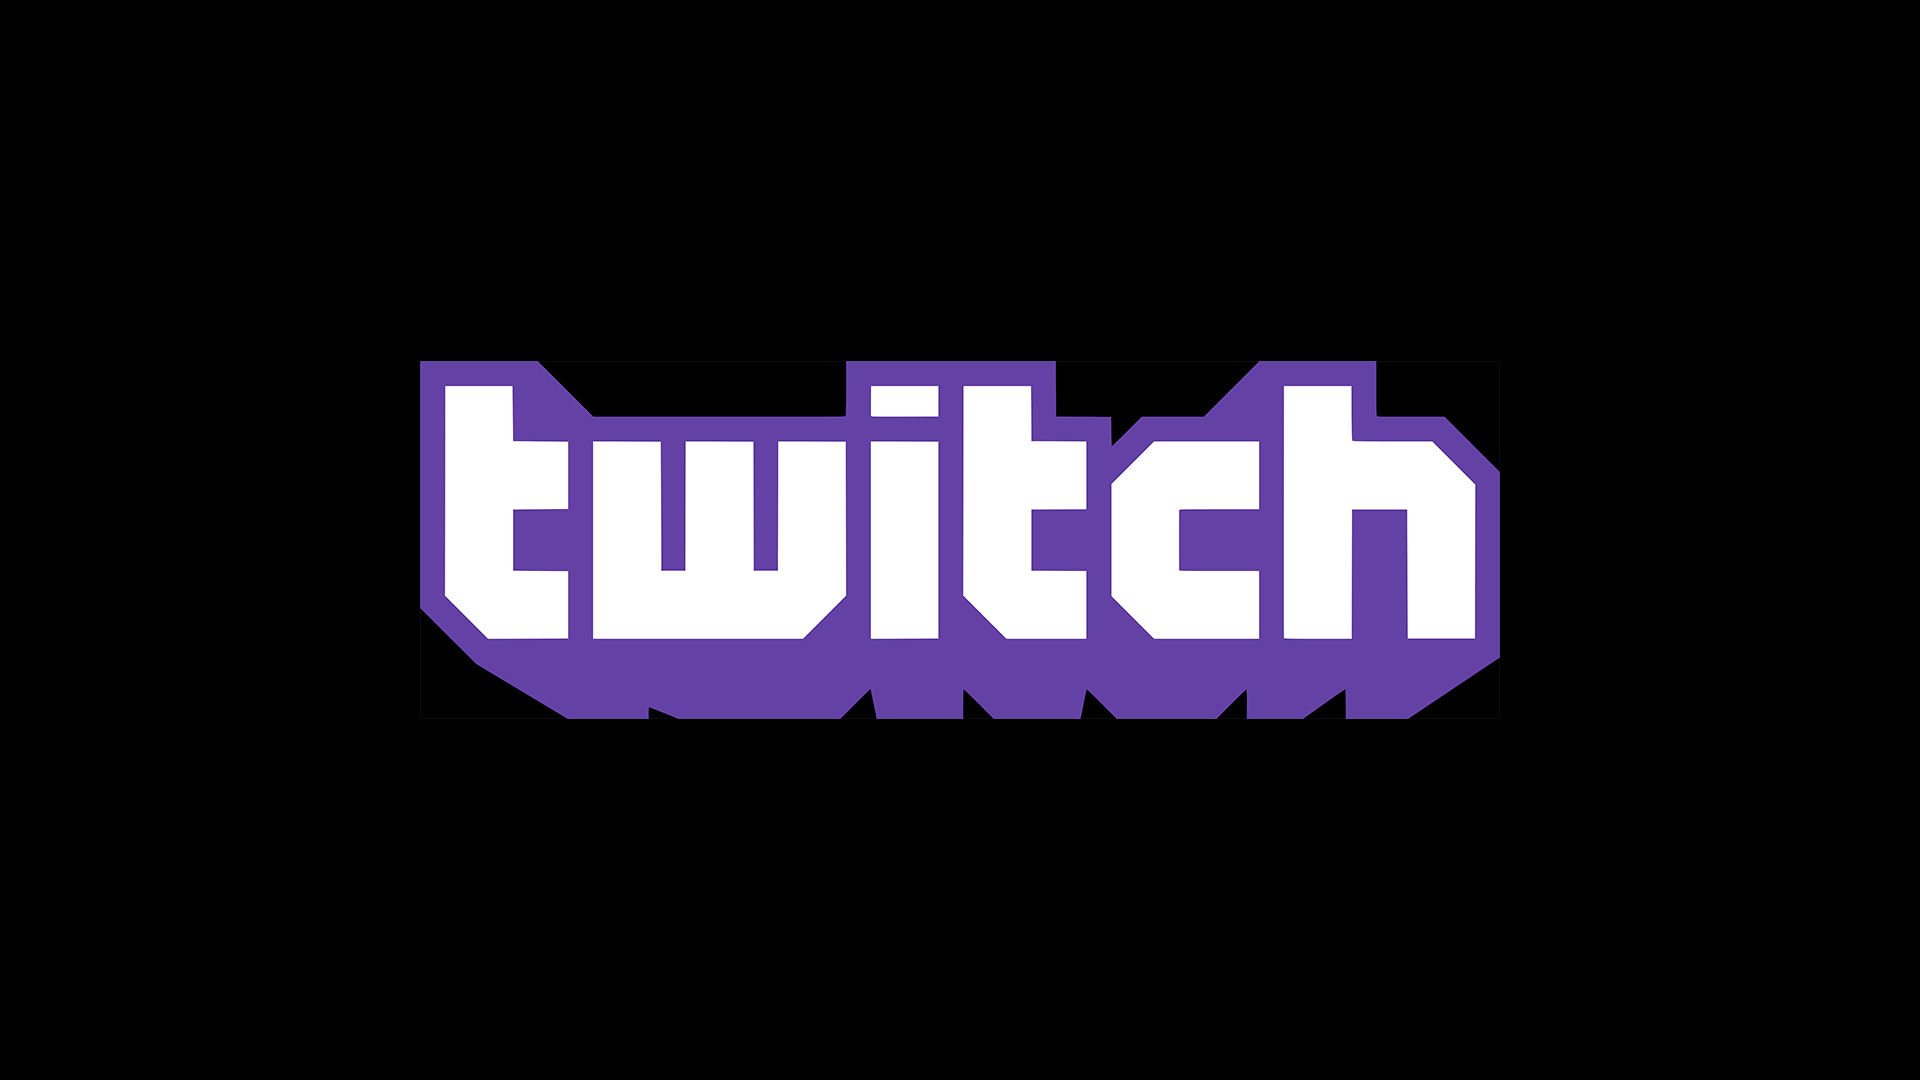 How to Check Your Hours Watched on Twitch